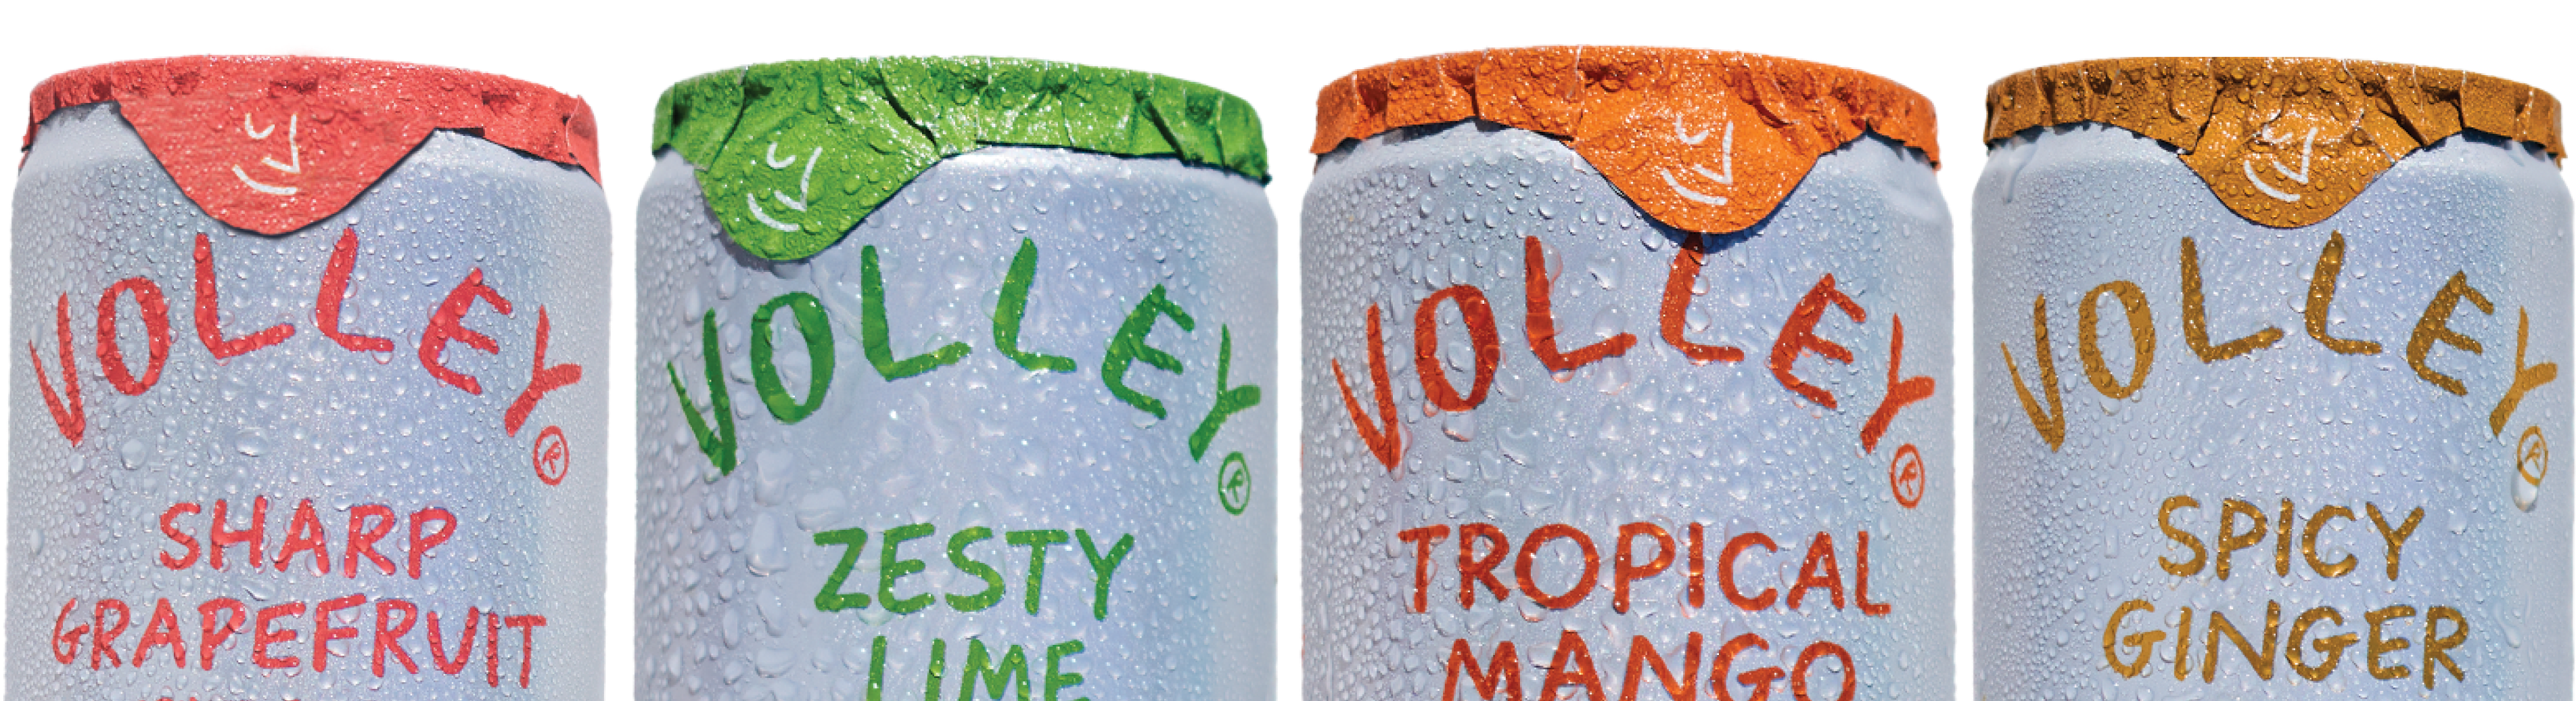 Volley Tequila Seltzer - bottom image 